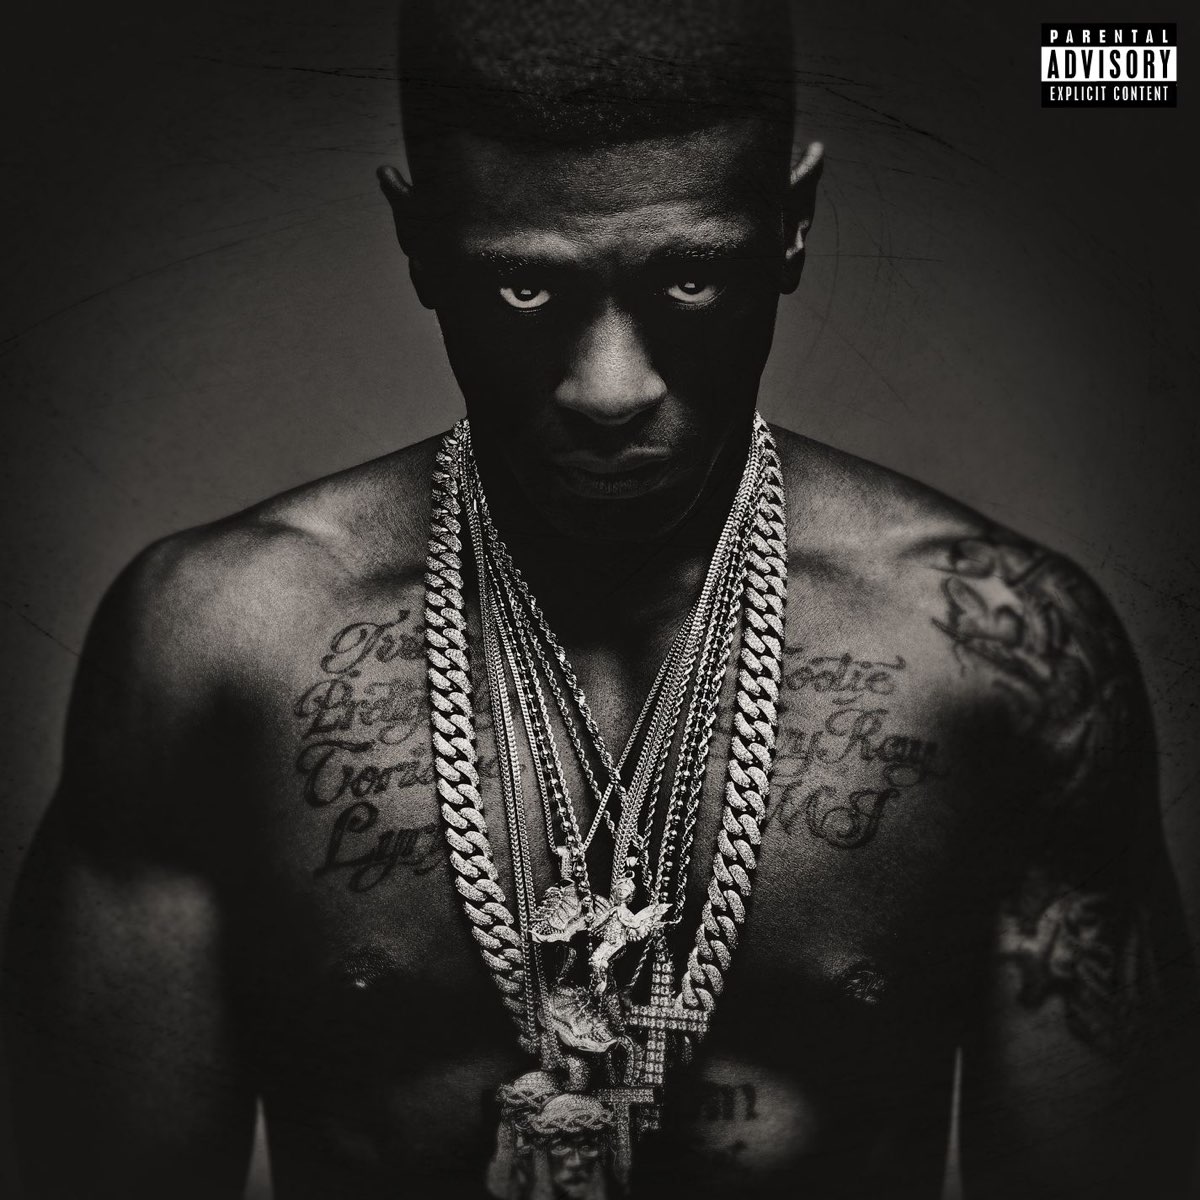 ‎Touch Down 2 Cause Hell by Boosie Badazz on Apple Music